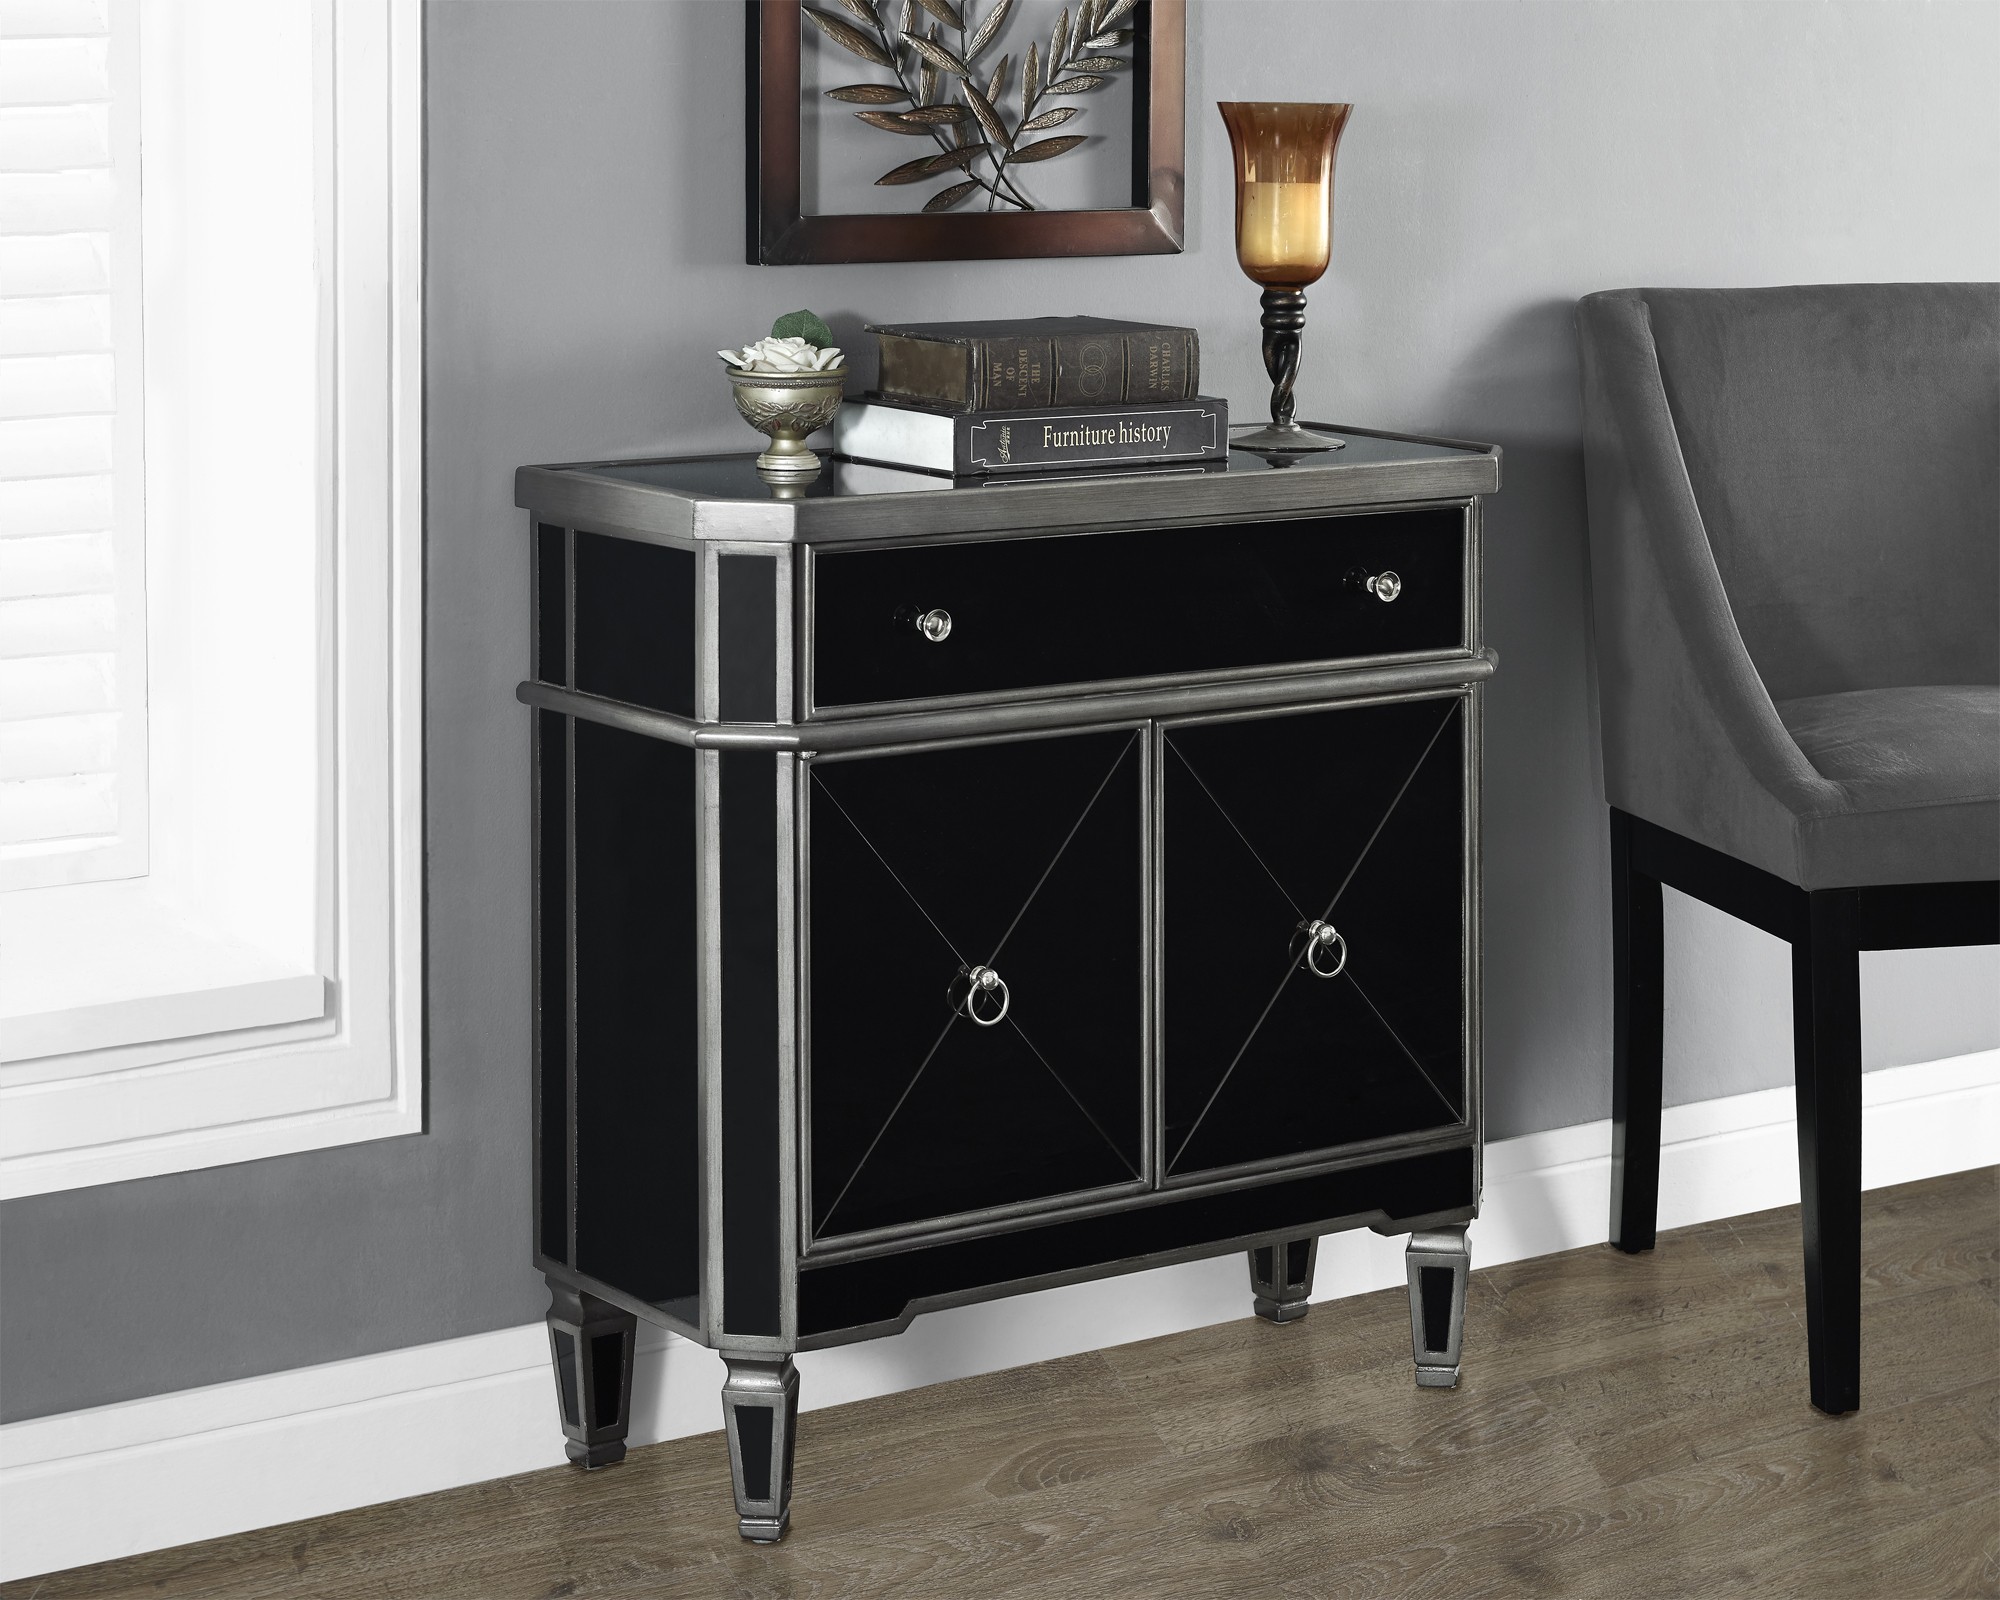 end tables antiqued mirrored nightstand target side table cool accent with drawer furniture elegant for home ideas drawers house decorations contemporary bedside pedestal metal